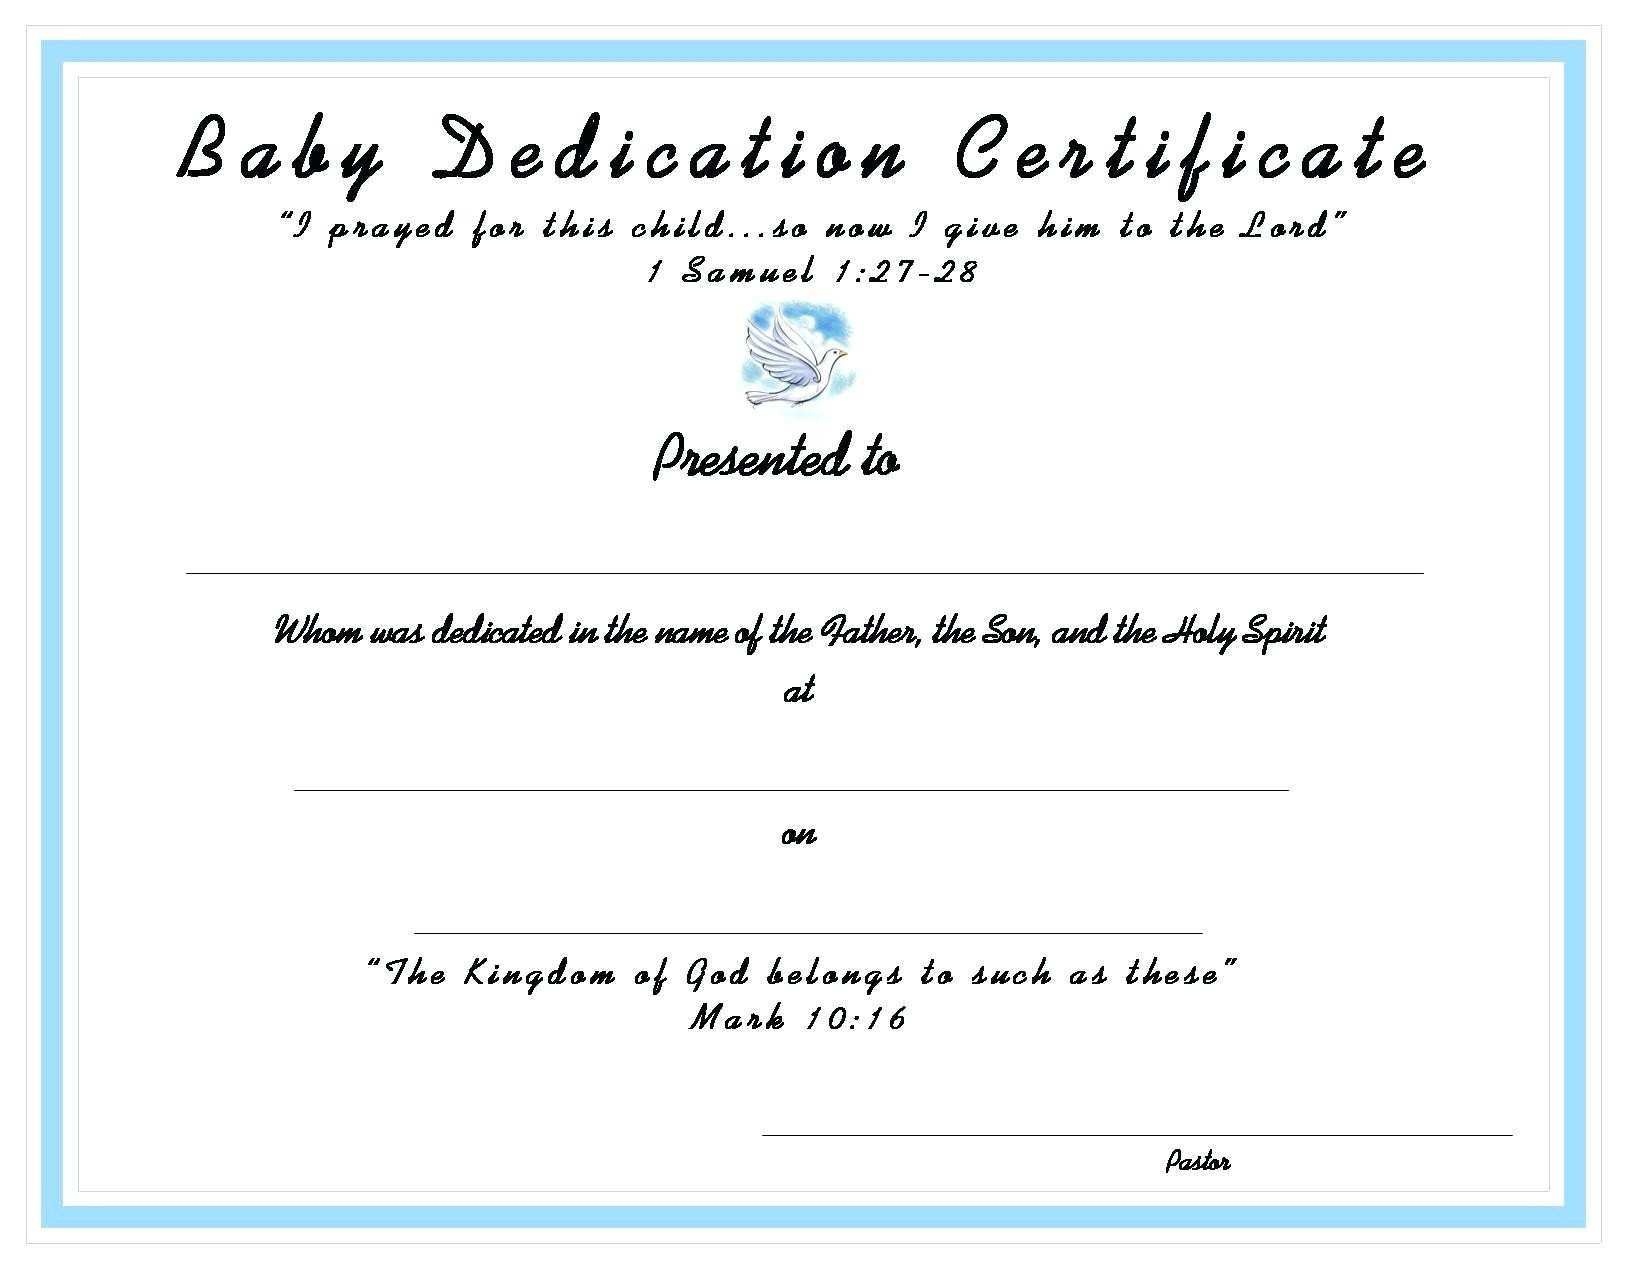 word templates free download baptism certificate